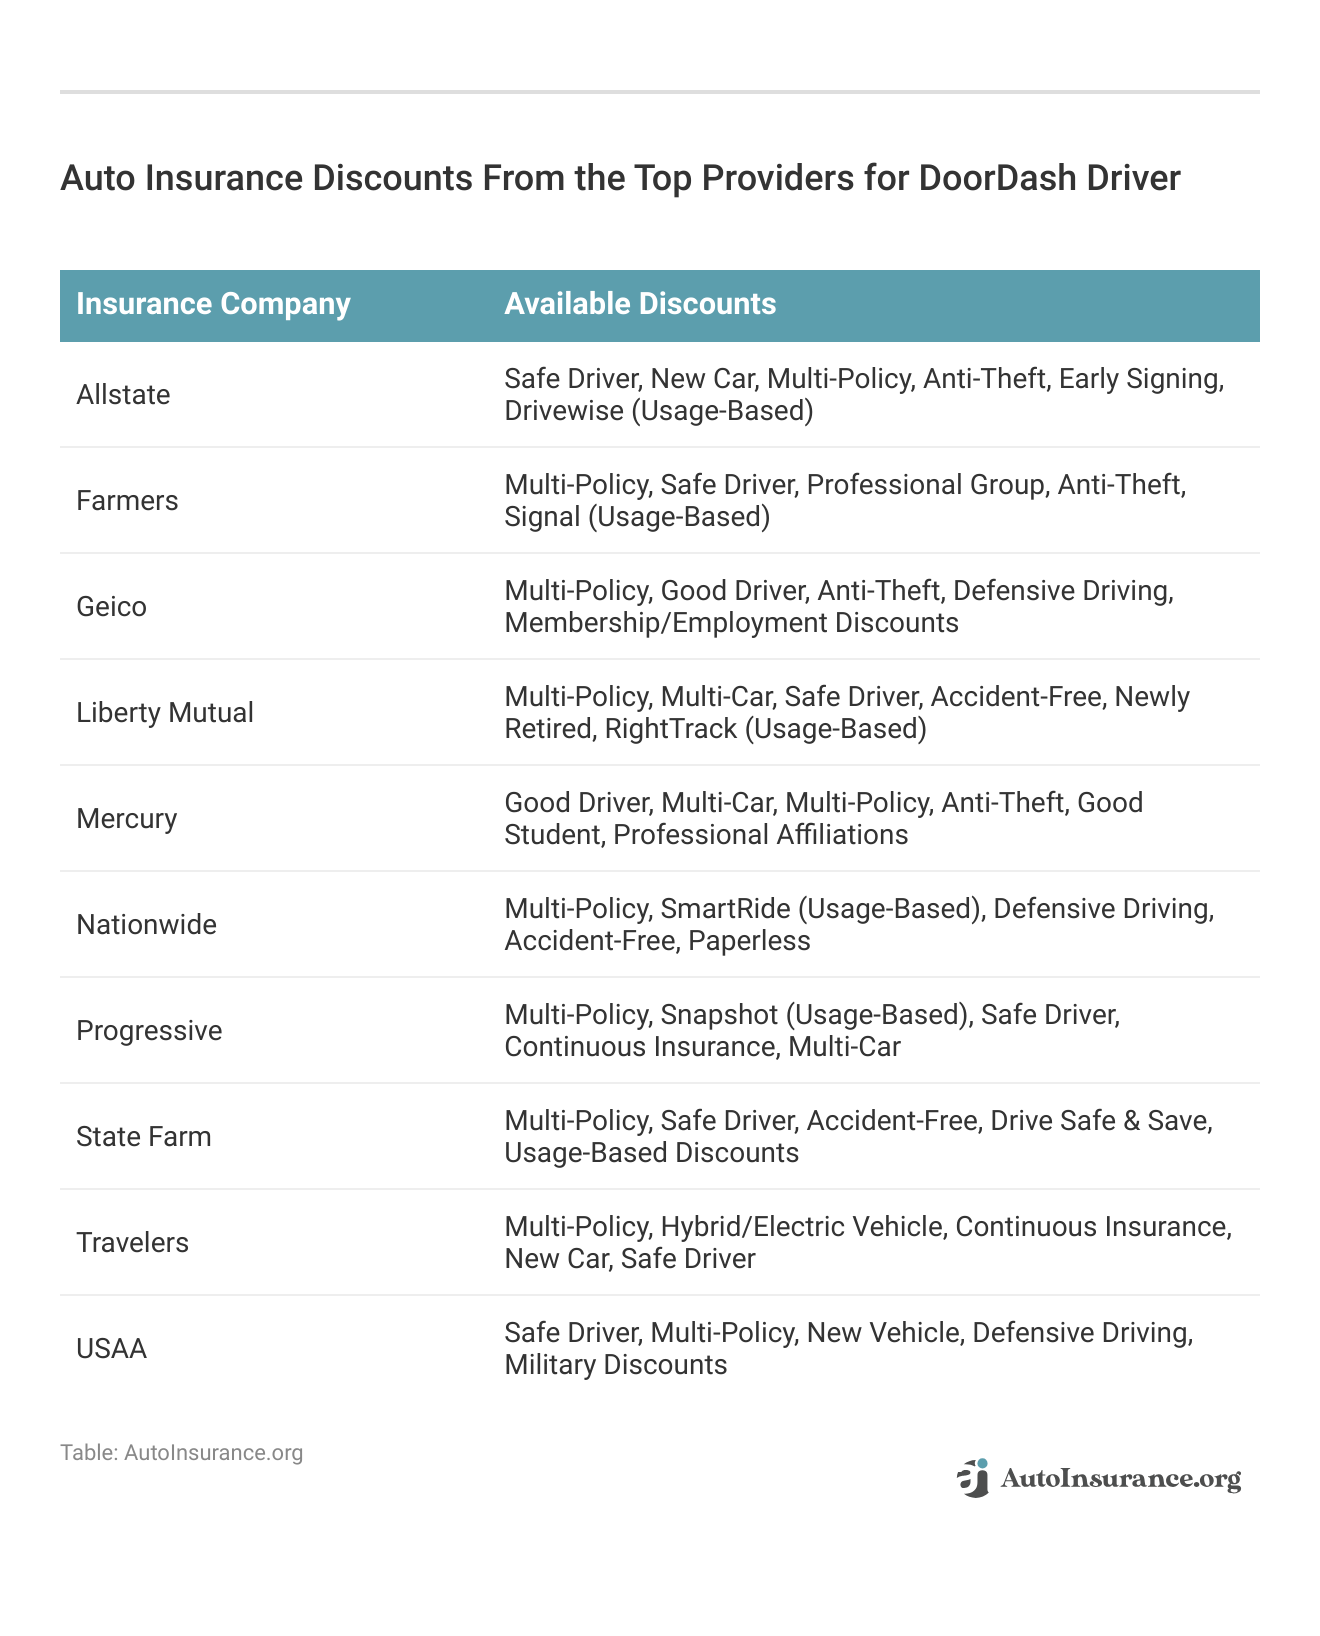 <h3>Auto Insurance Discounts From the Top Providers for DoorDash Driver</h3>